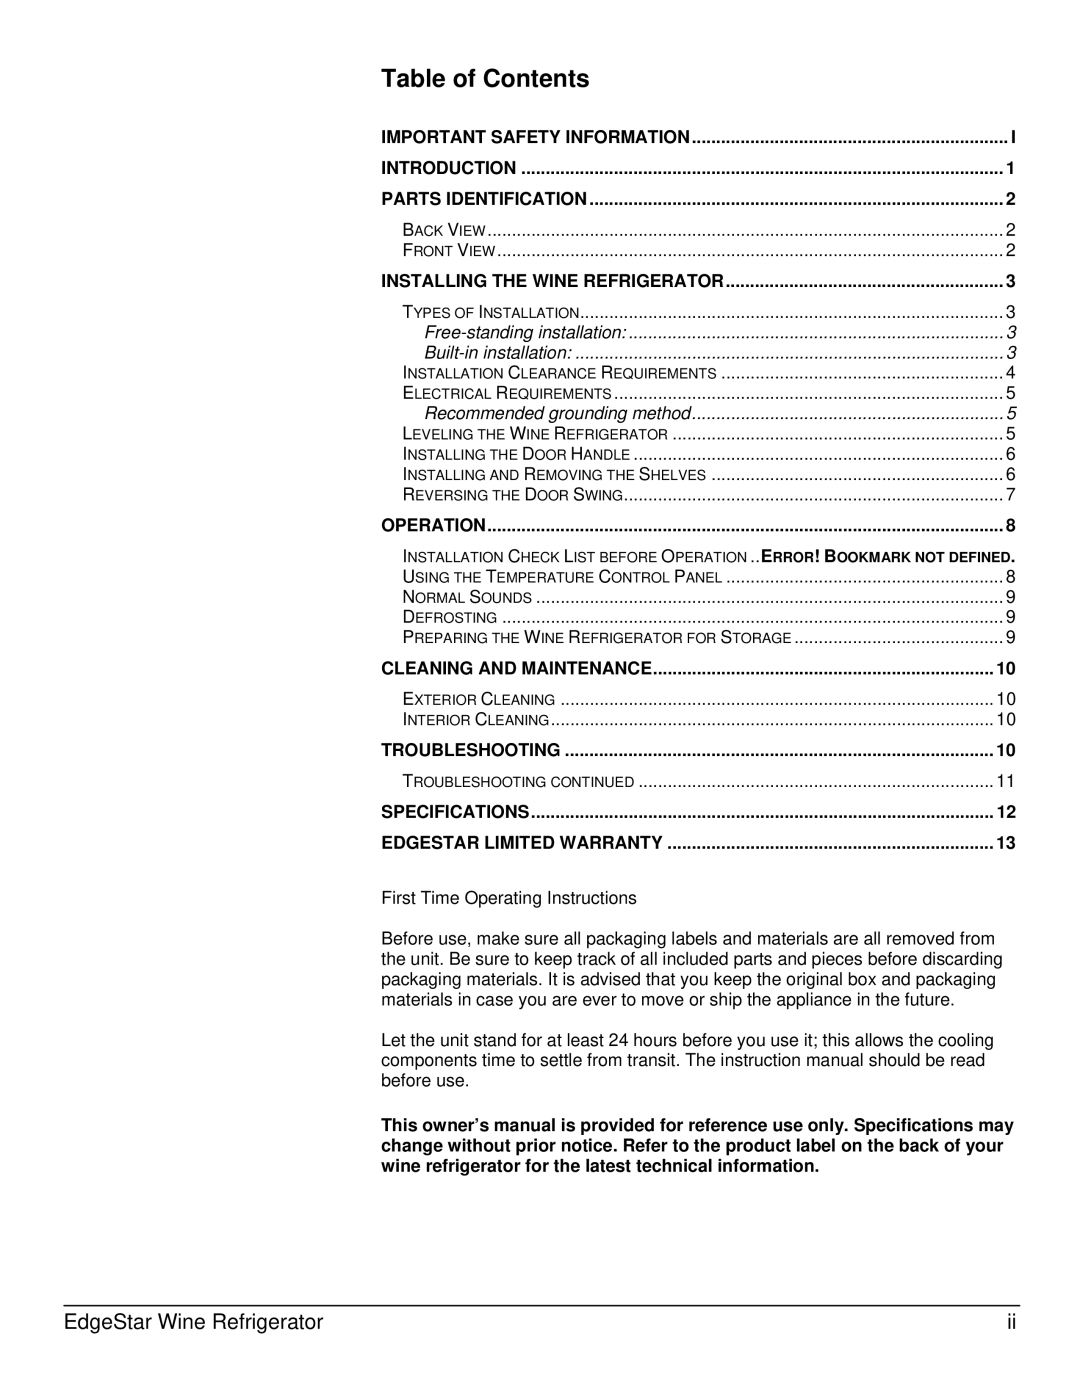 EdgeStar CWR460DZ owner manual Table of Contents 